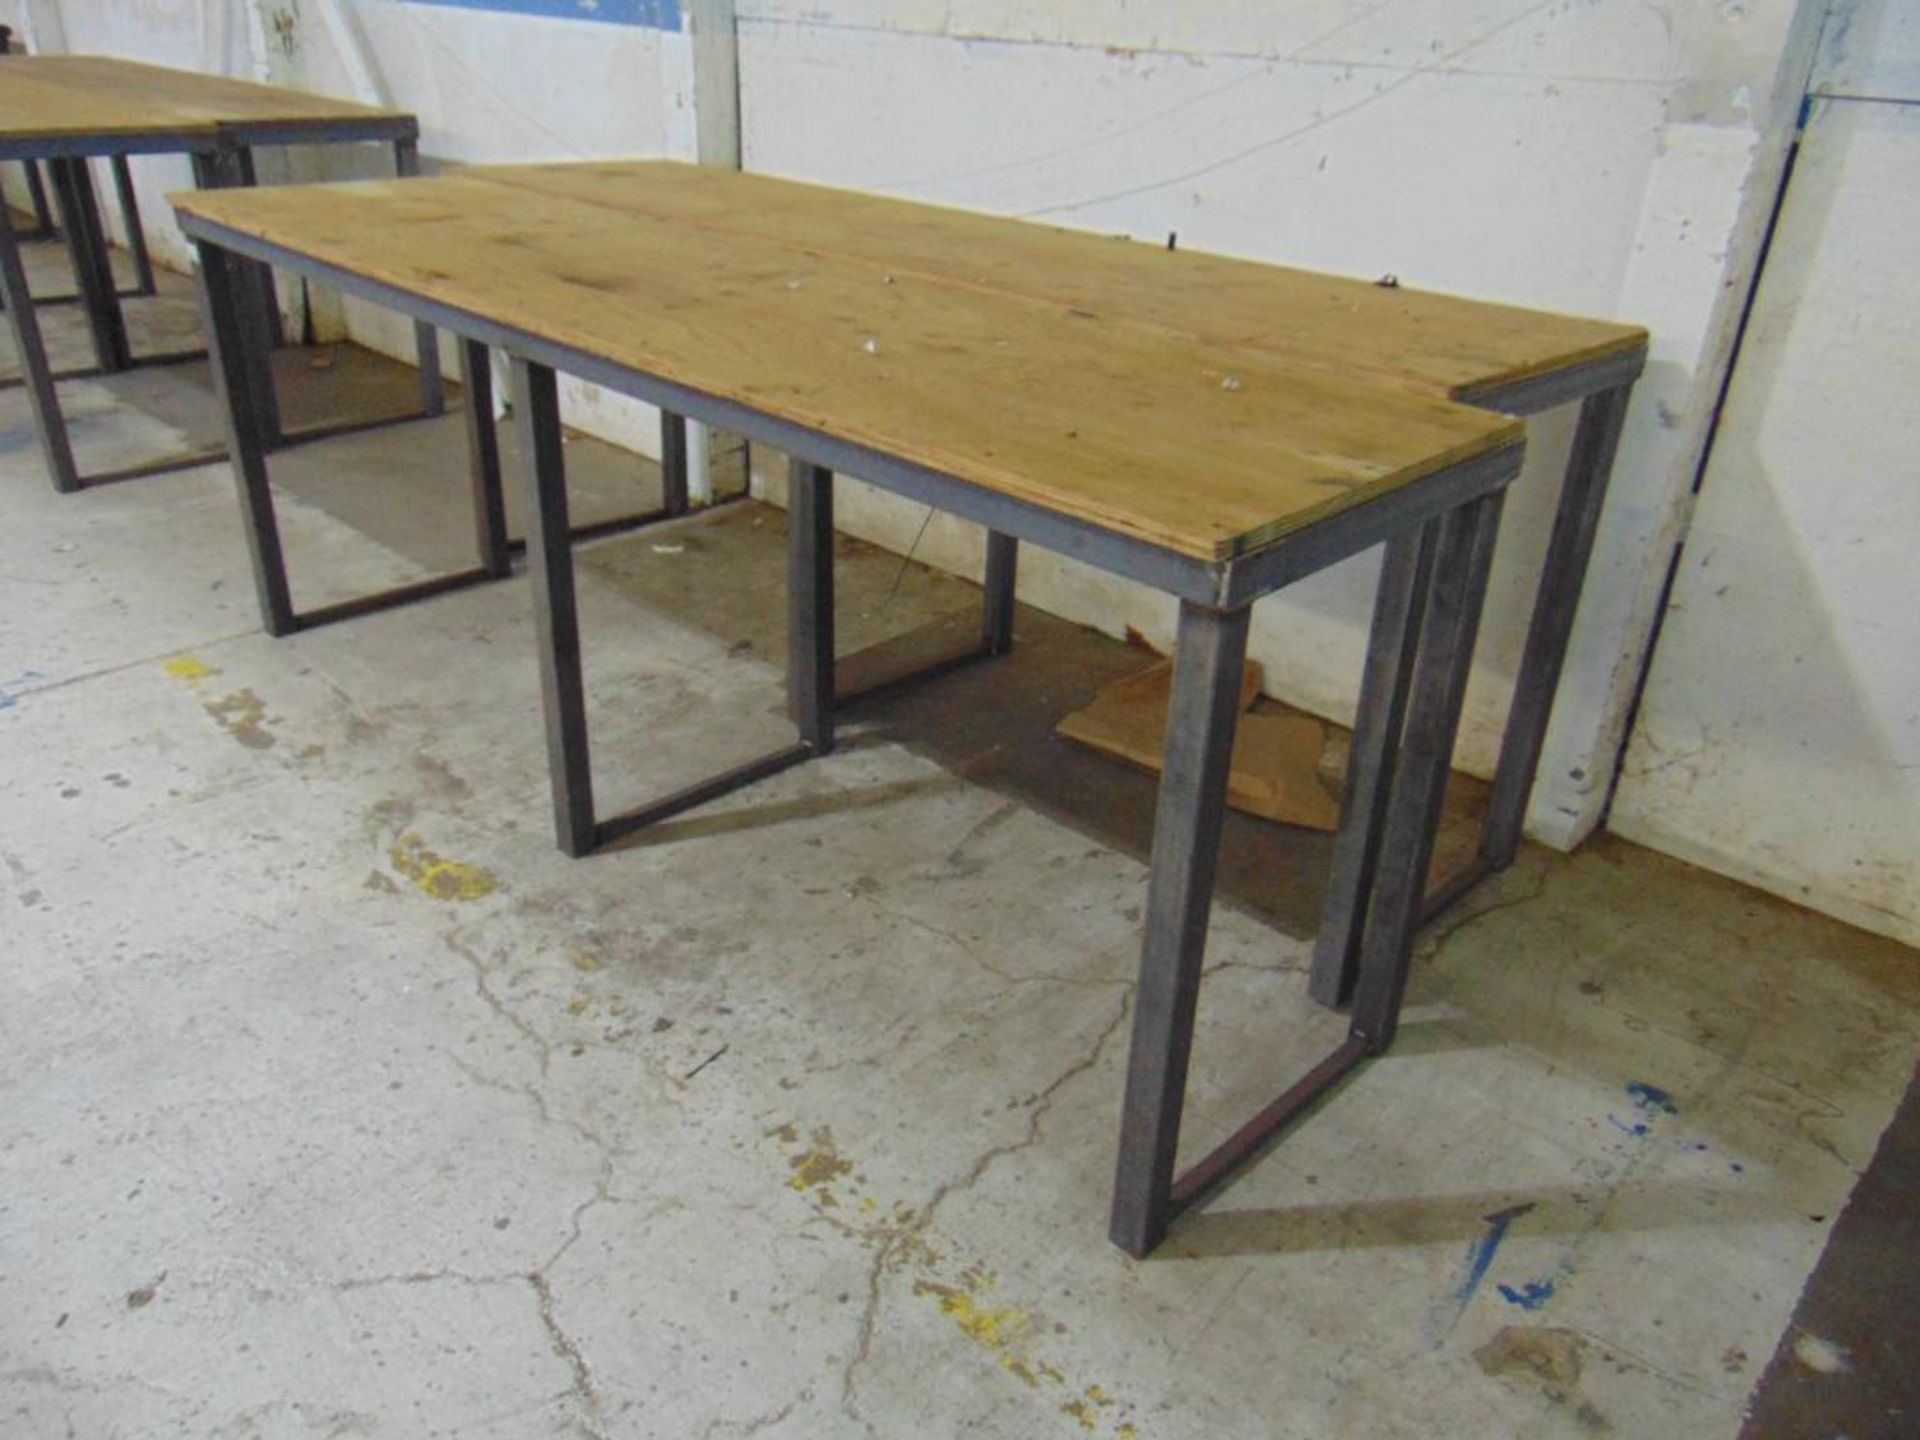 2 Steel Tables* - Image 2 of 2